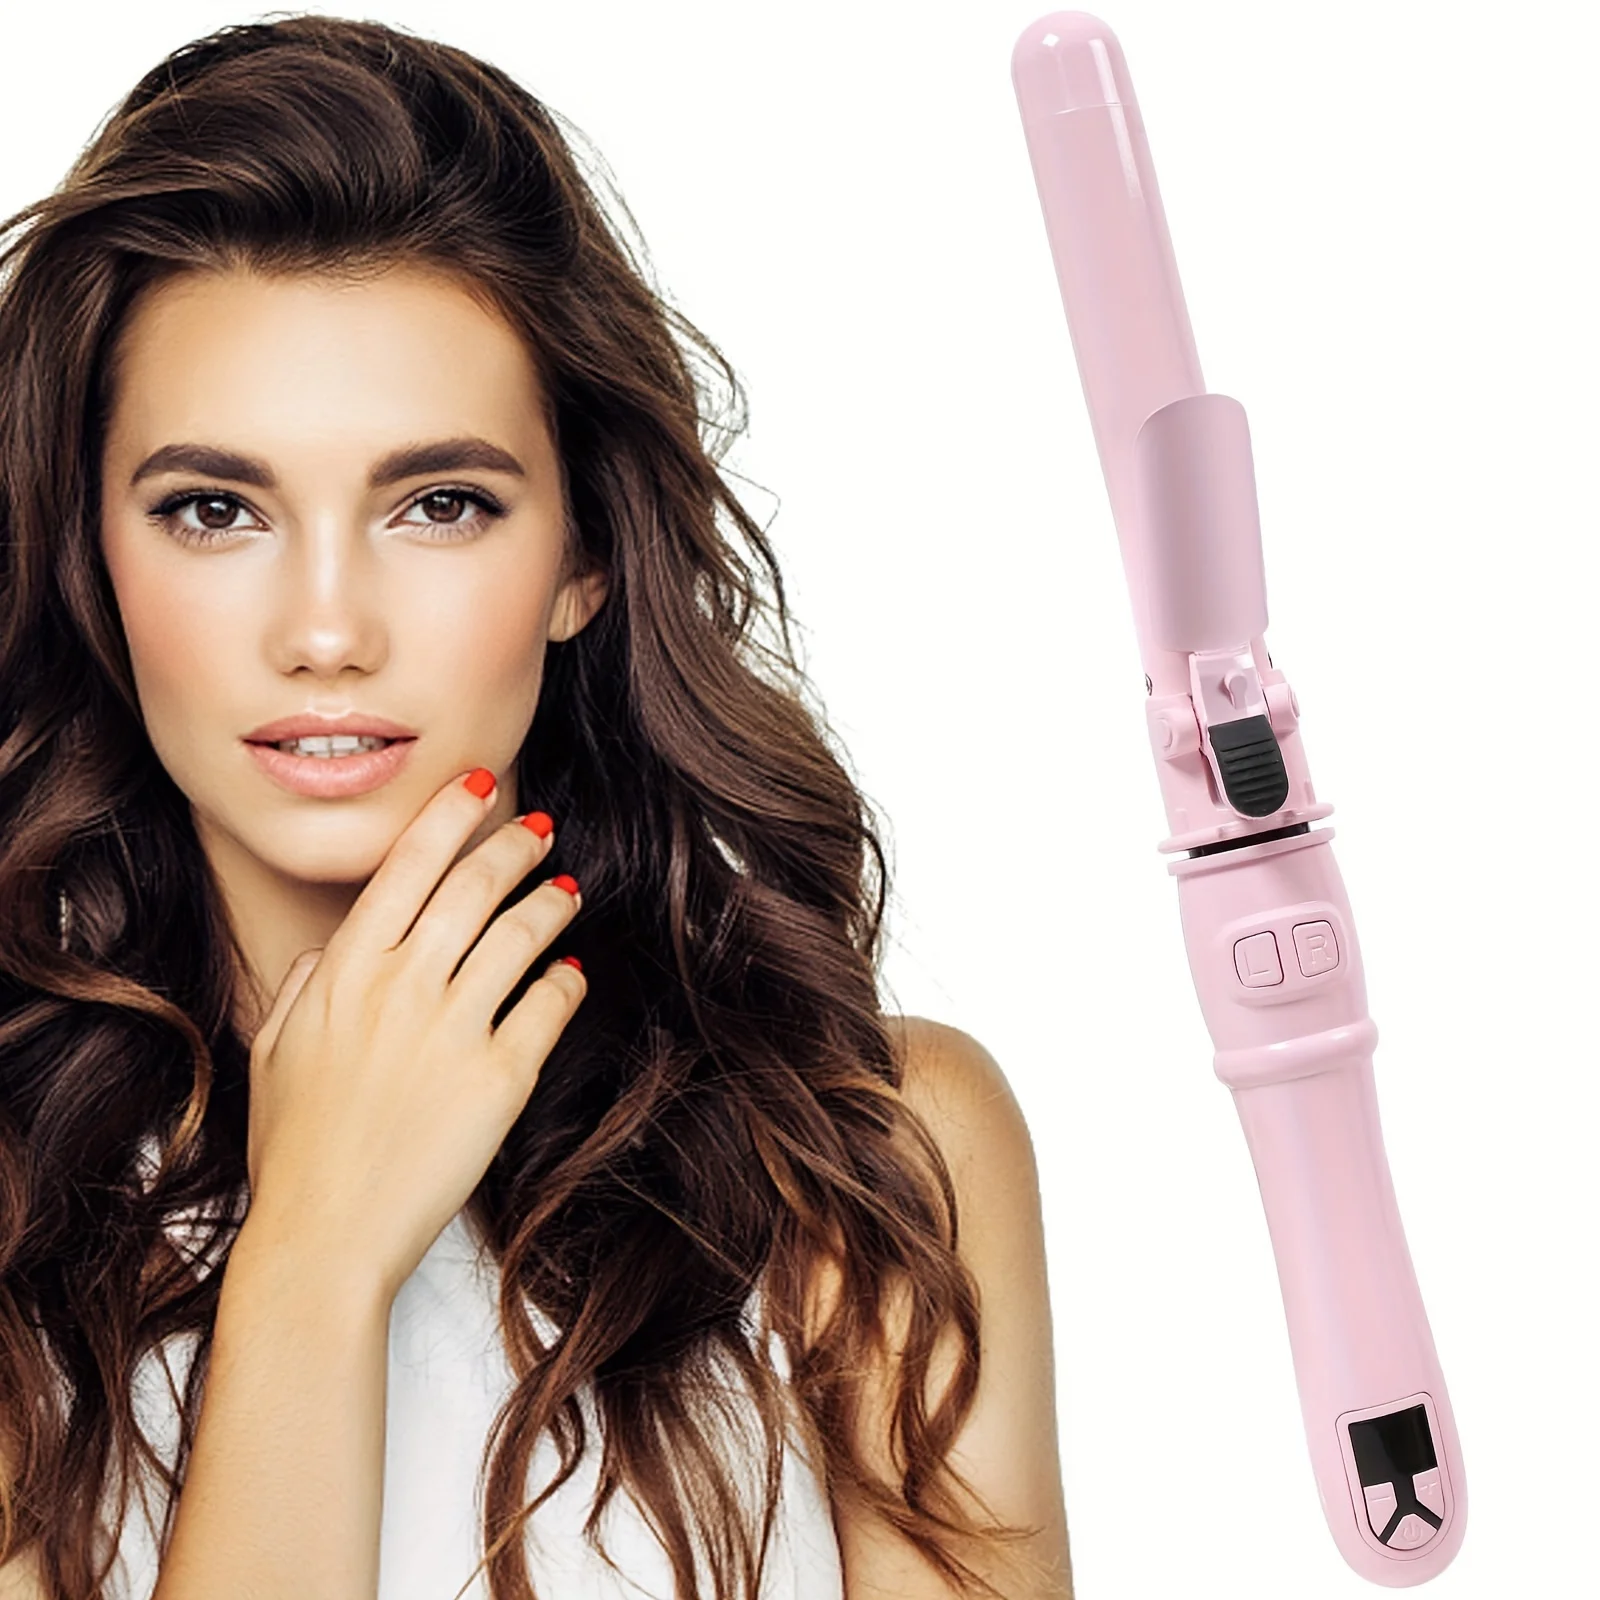 

Automatic Hair Curling Wand, Rotating Curling Iron, Professional Hair Curler, Hair Styling Iron, Fast Heating Wand For Medium/Lo